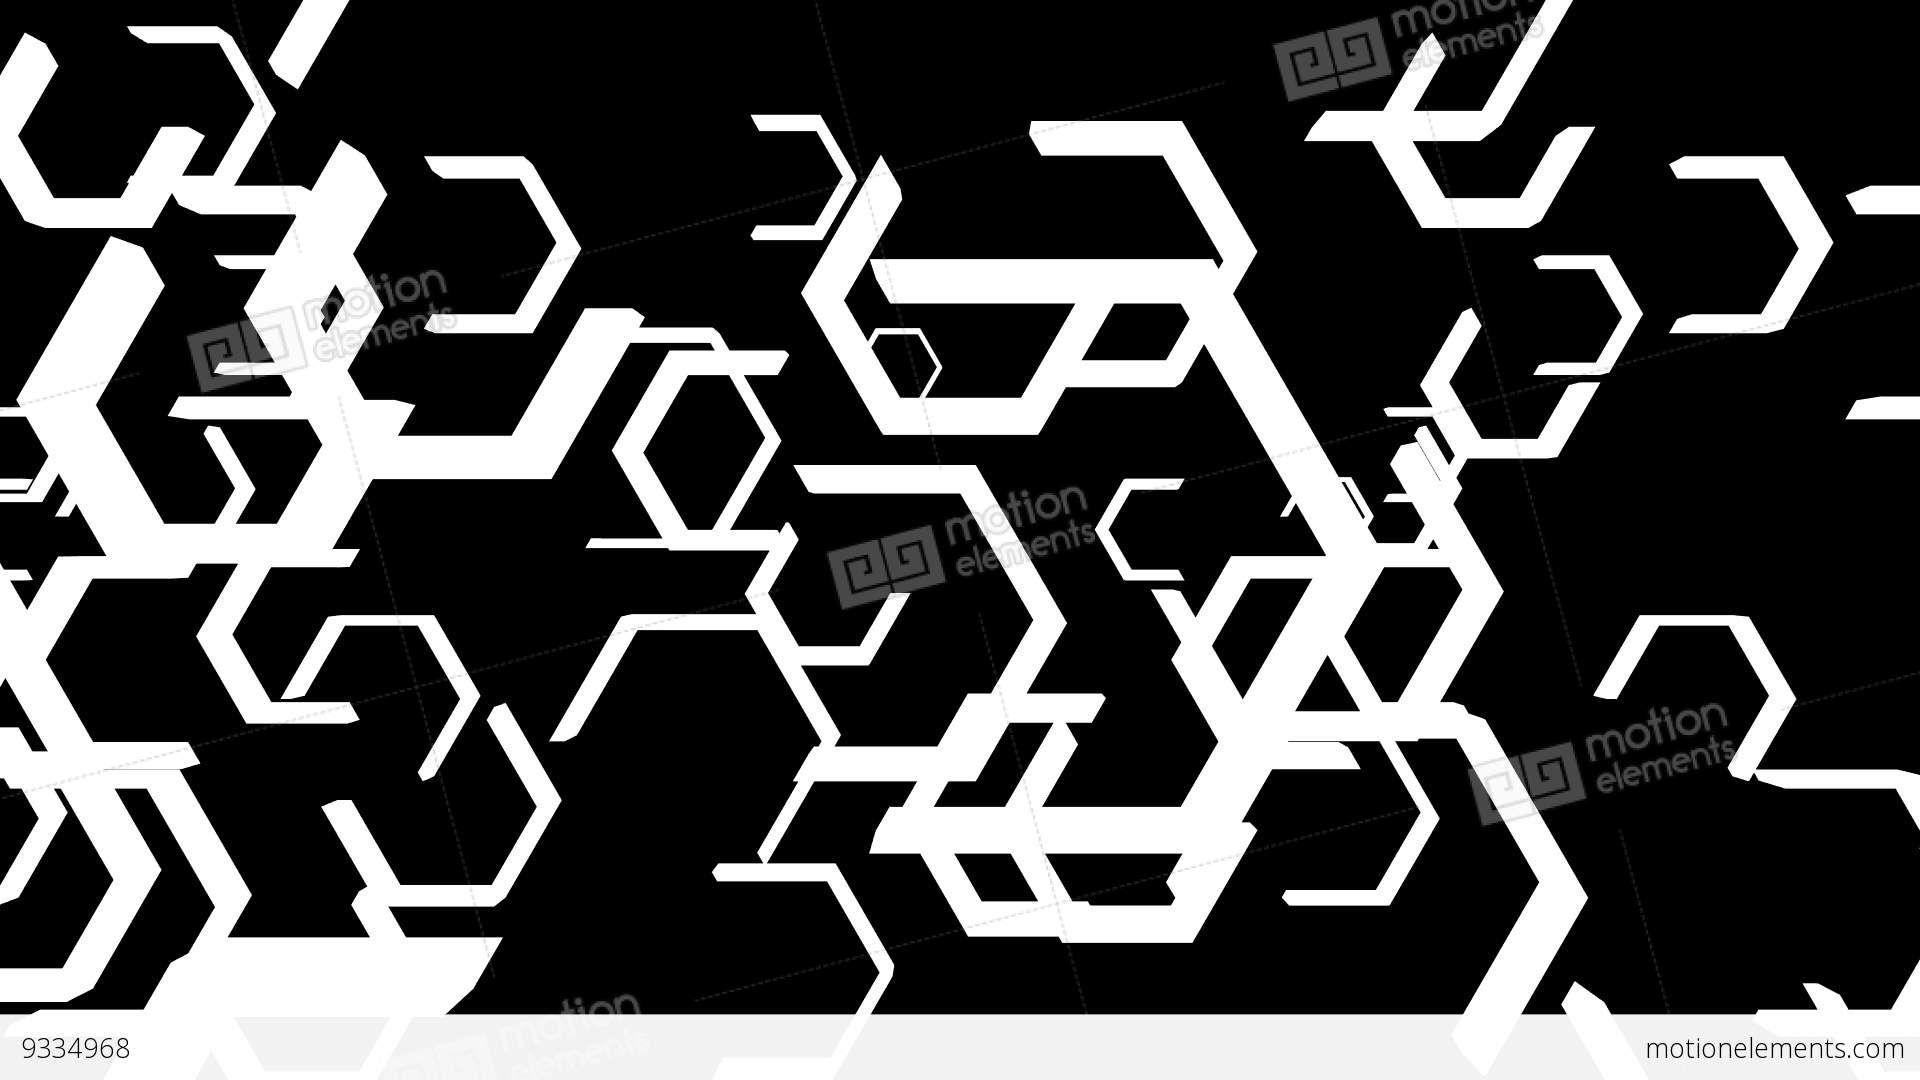 Black and White Hexagon Logo - Moving Black And White Hexagon Shapes Scrolling In 3D Space Stock ...